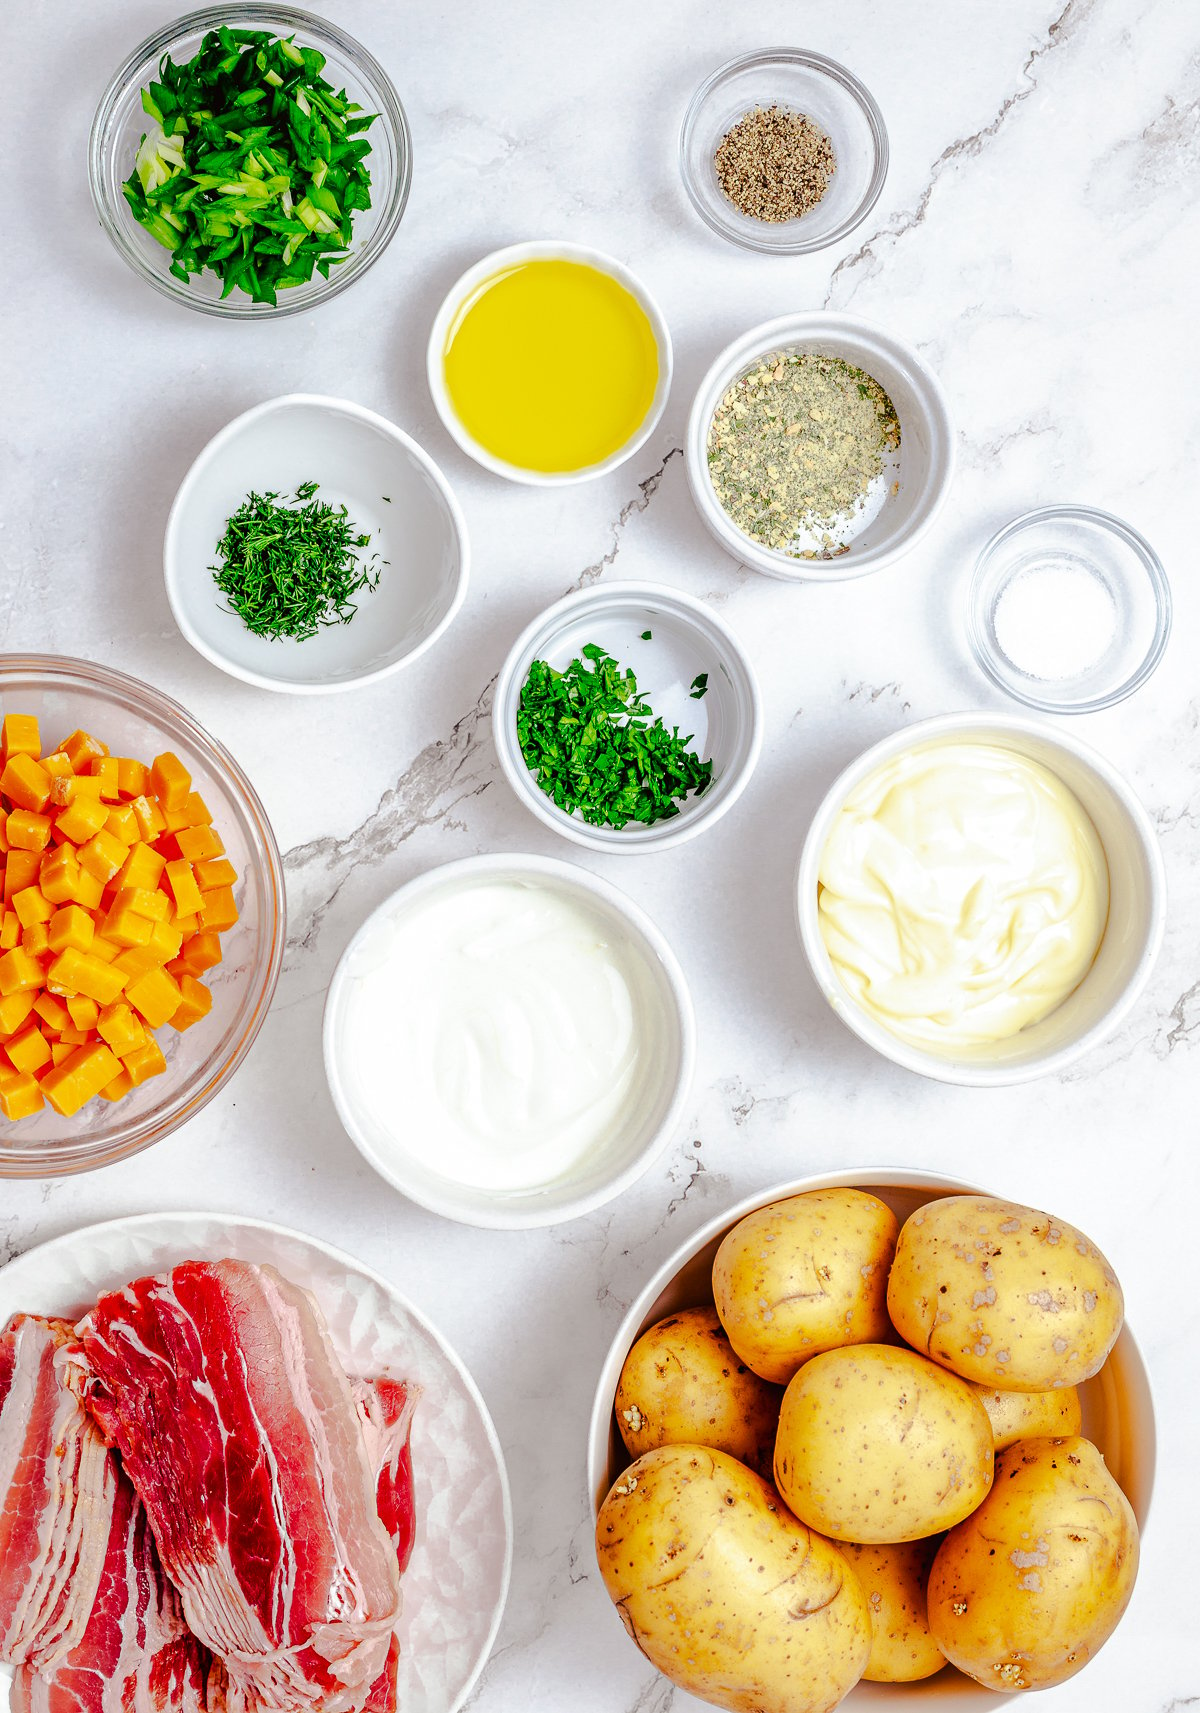 Ingredients needed to make Bacon Ranch Potato Salad